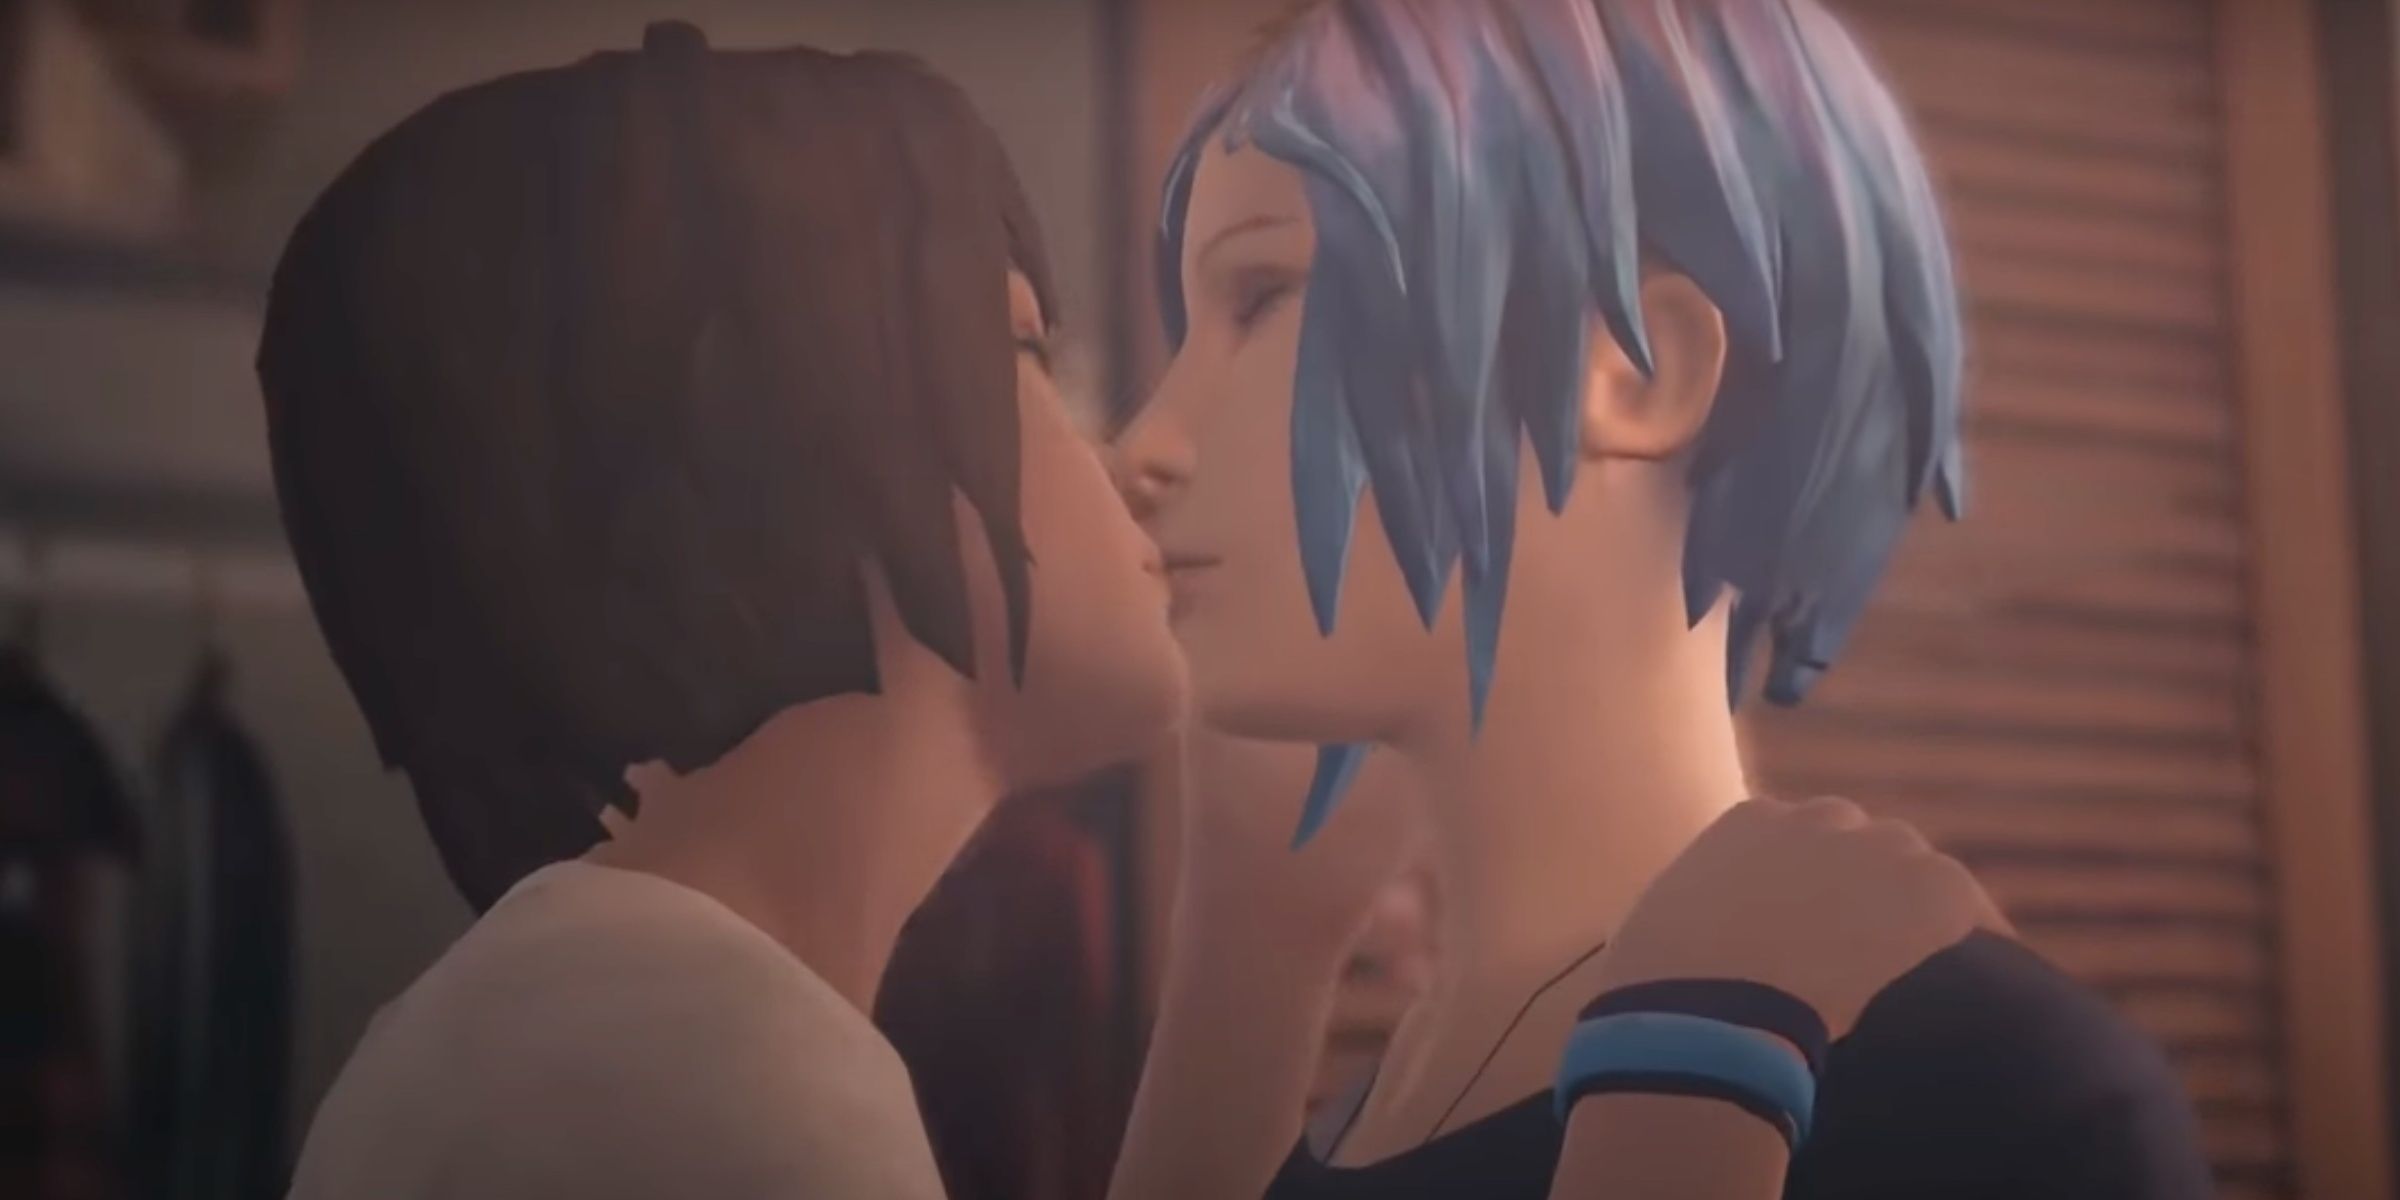 Life Is Strange Most Heartwarming Moments: Max Kisses Chloe in her room.